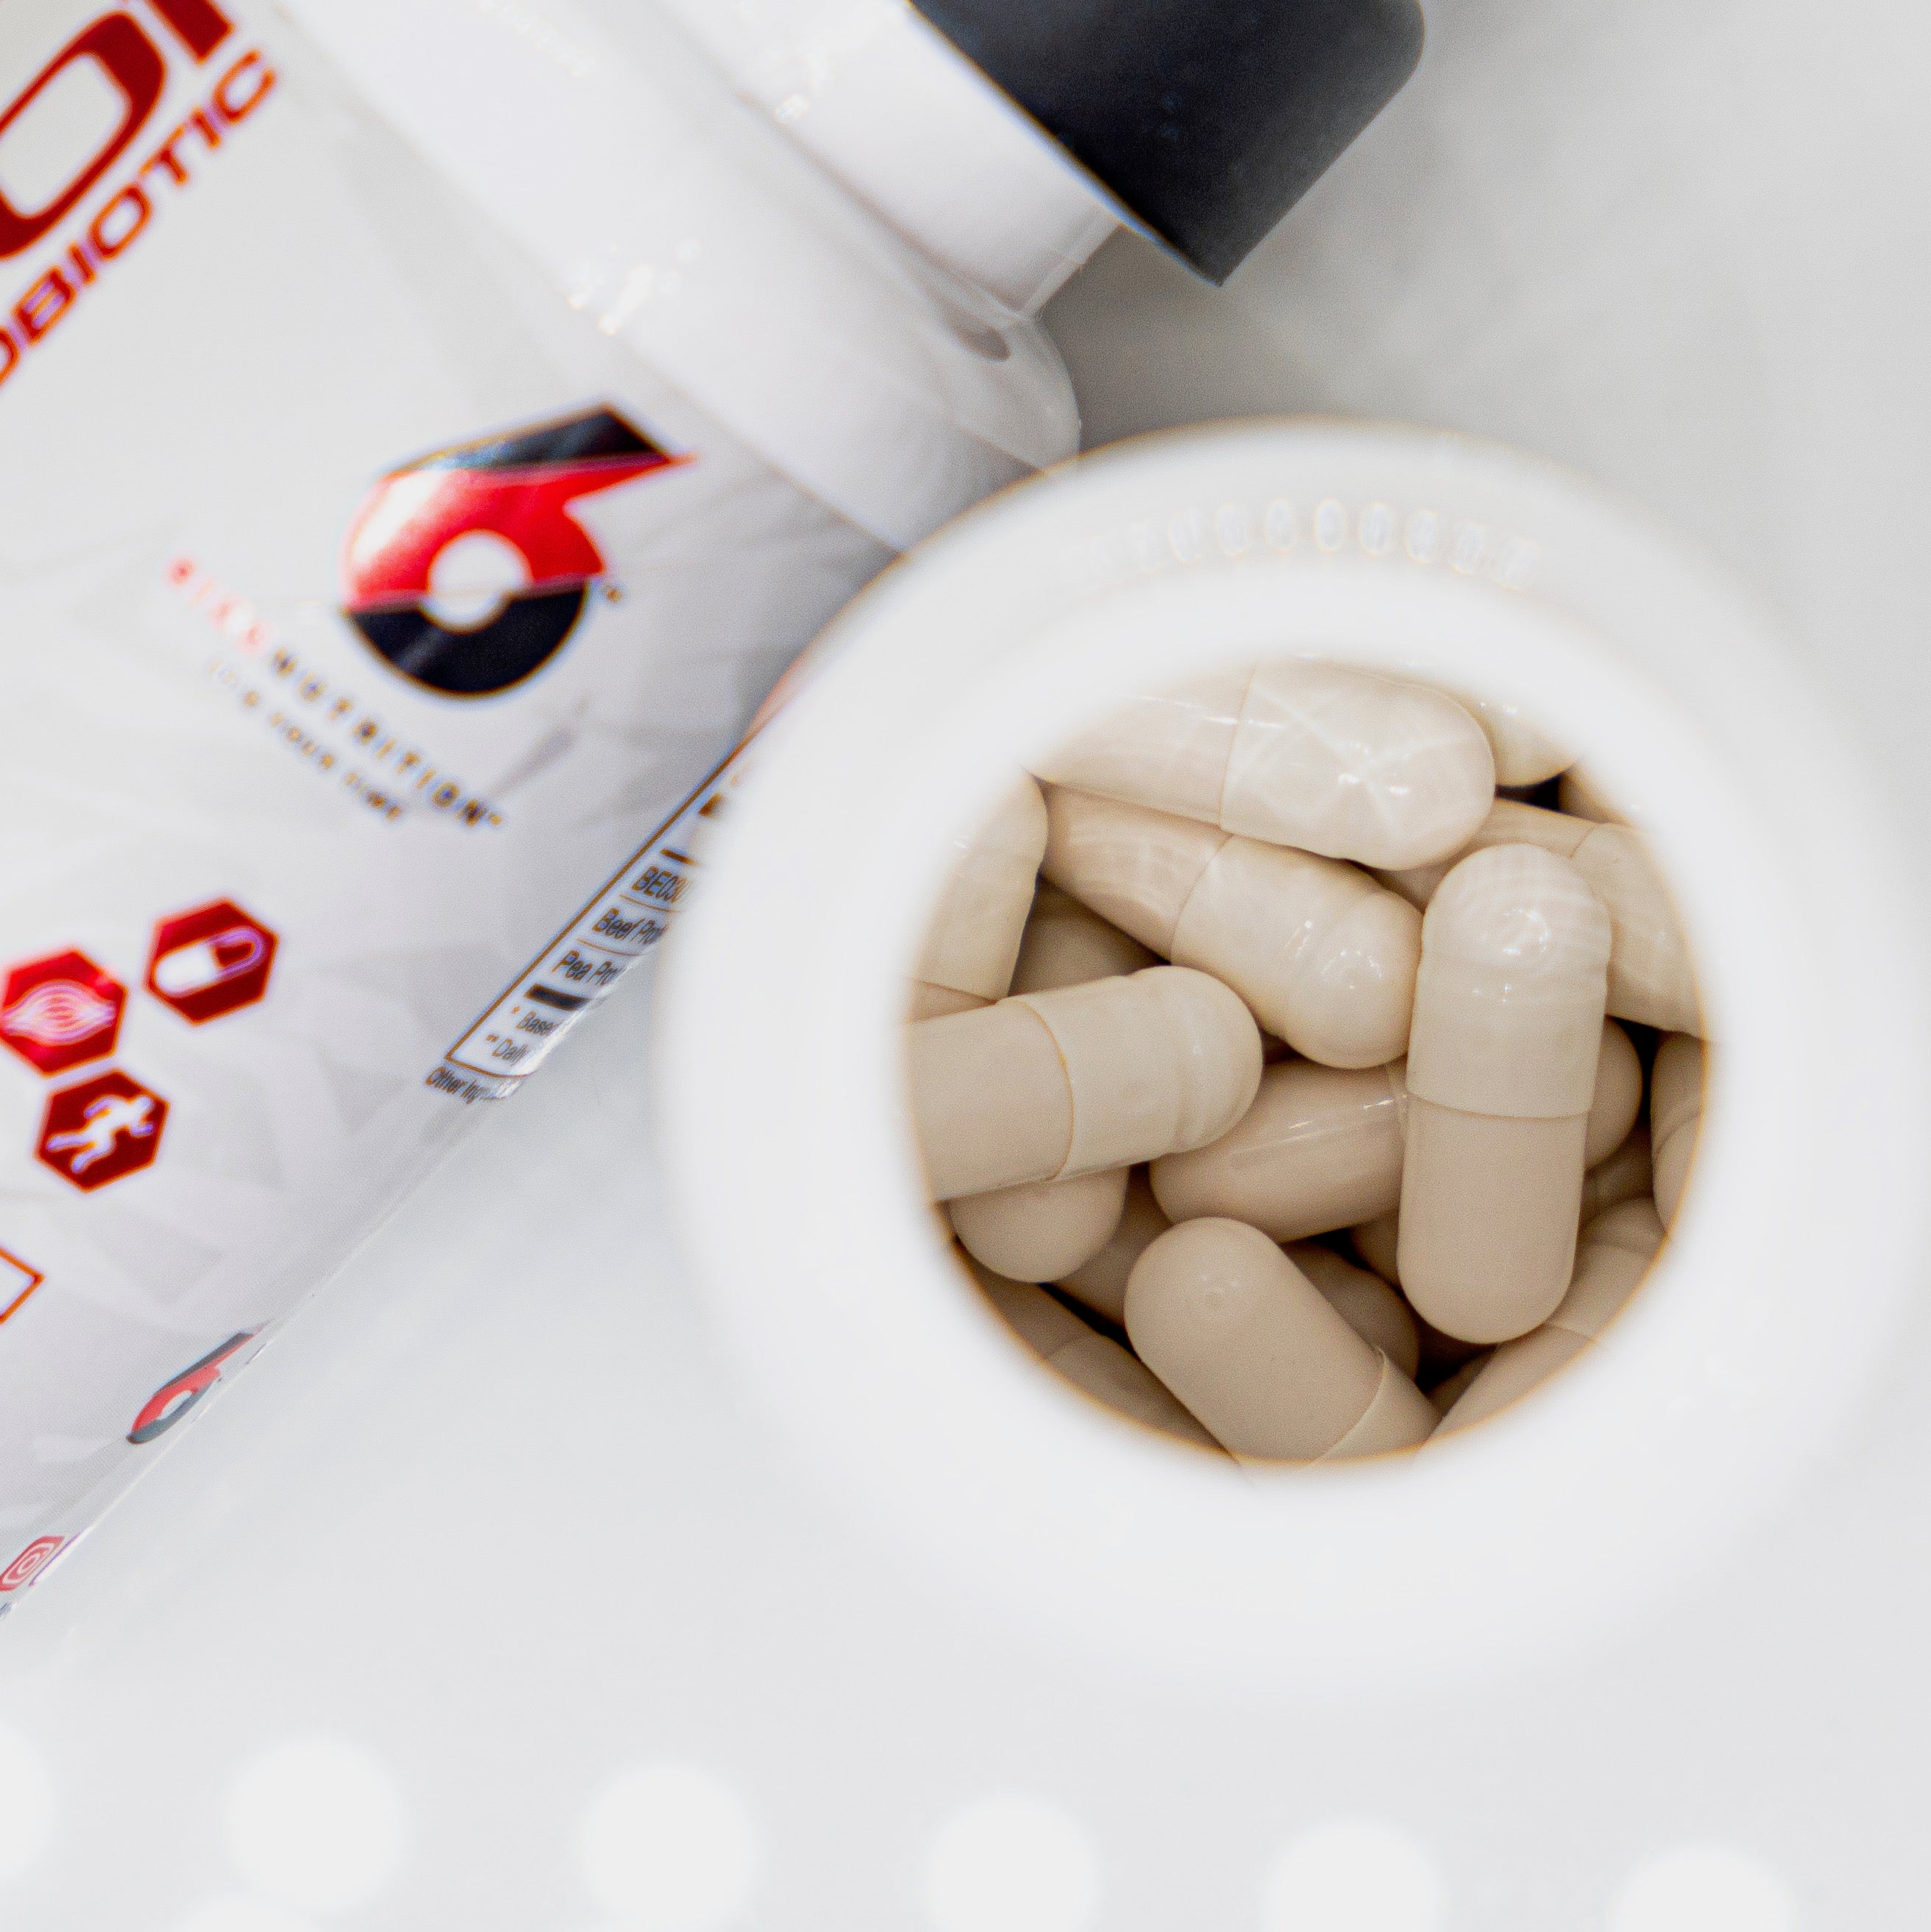 WHITE CAPSULES BE0301 Extreme Probiotic by Sixx Nutrition 1 pill, maintains gut health formulated for athletes.